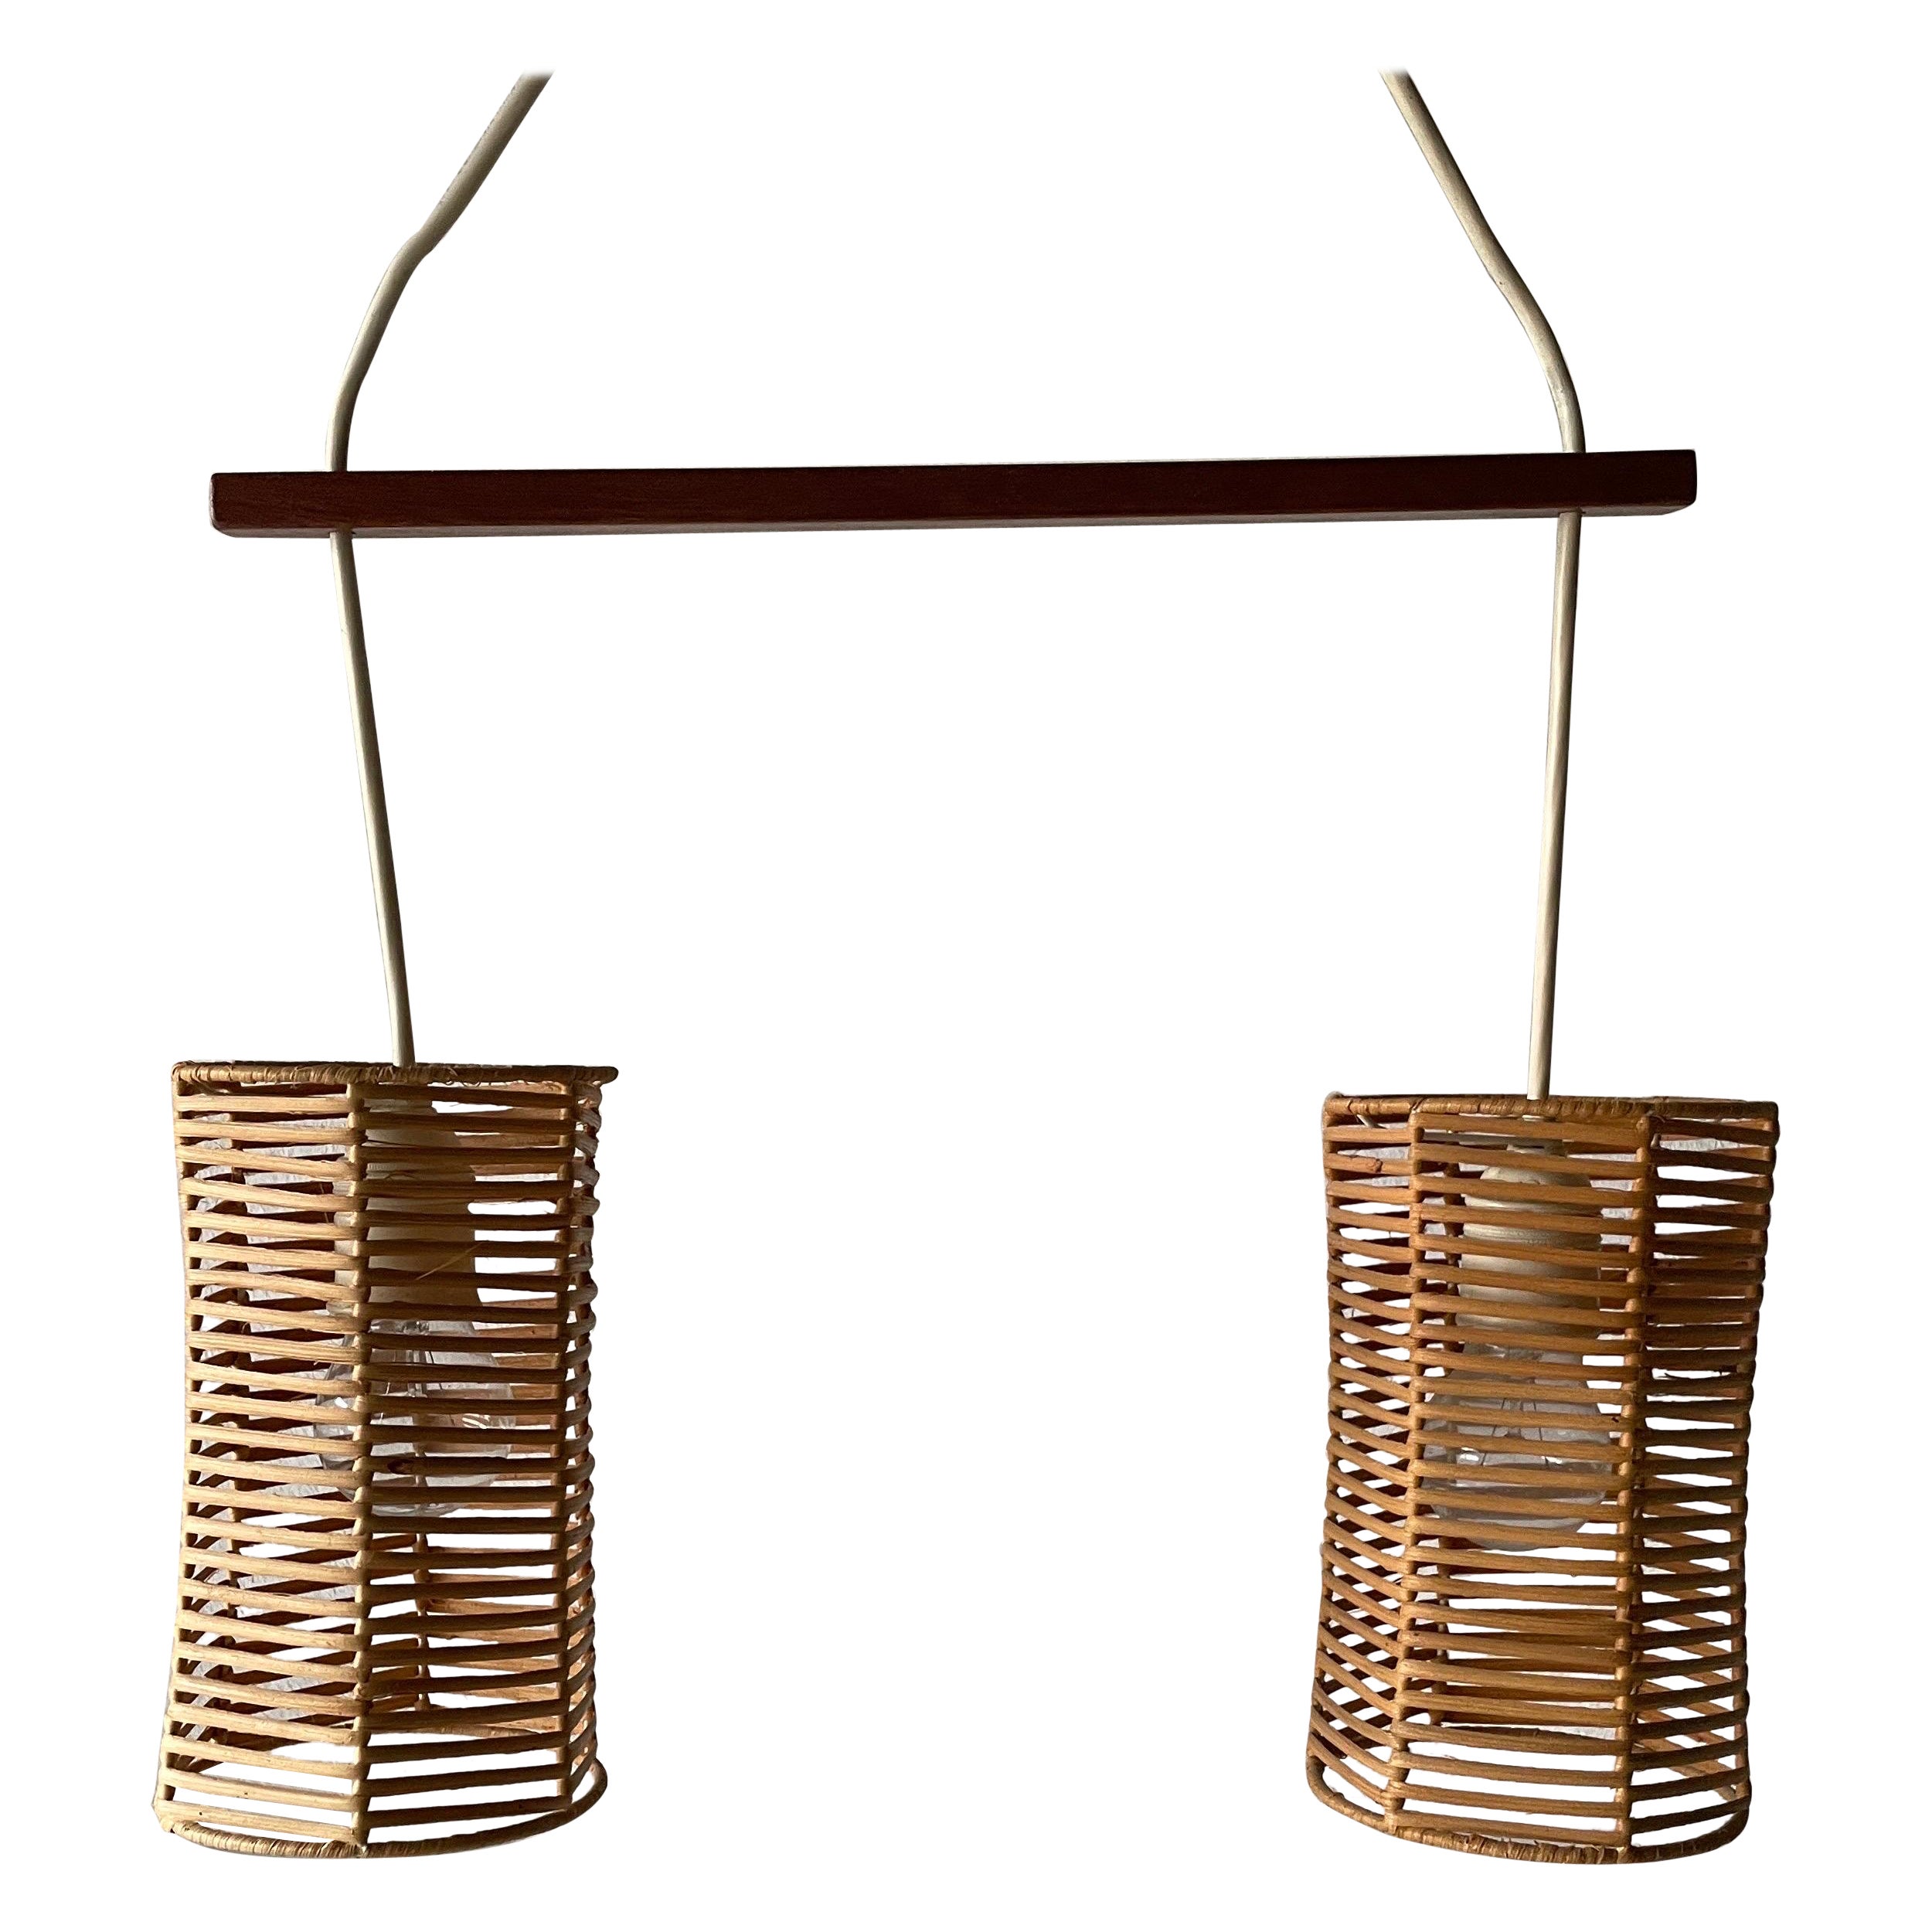 Double Shade Wicker and Wood Pendant Lamp, 1960s, Germany